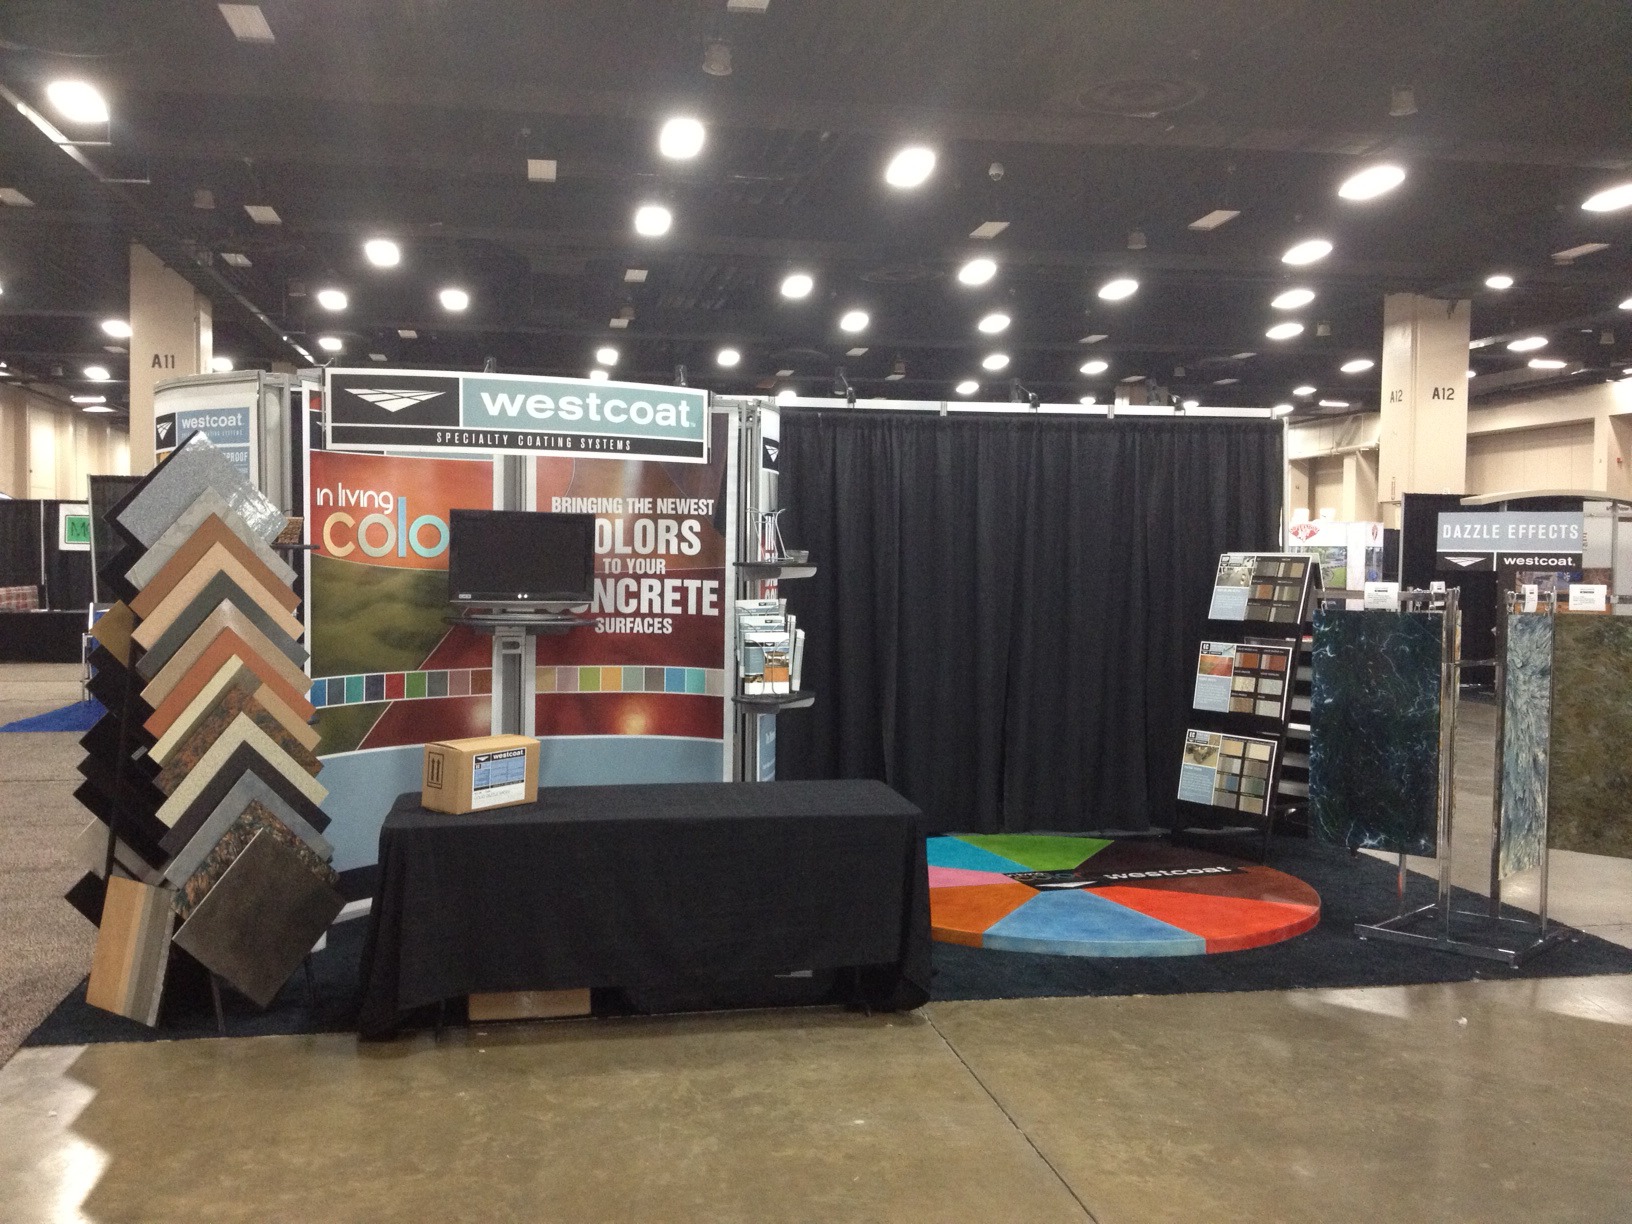 Concrete Decor Show starts tomorrow! Westcoat Specialty Coating Systems